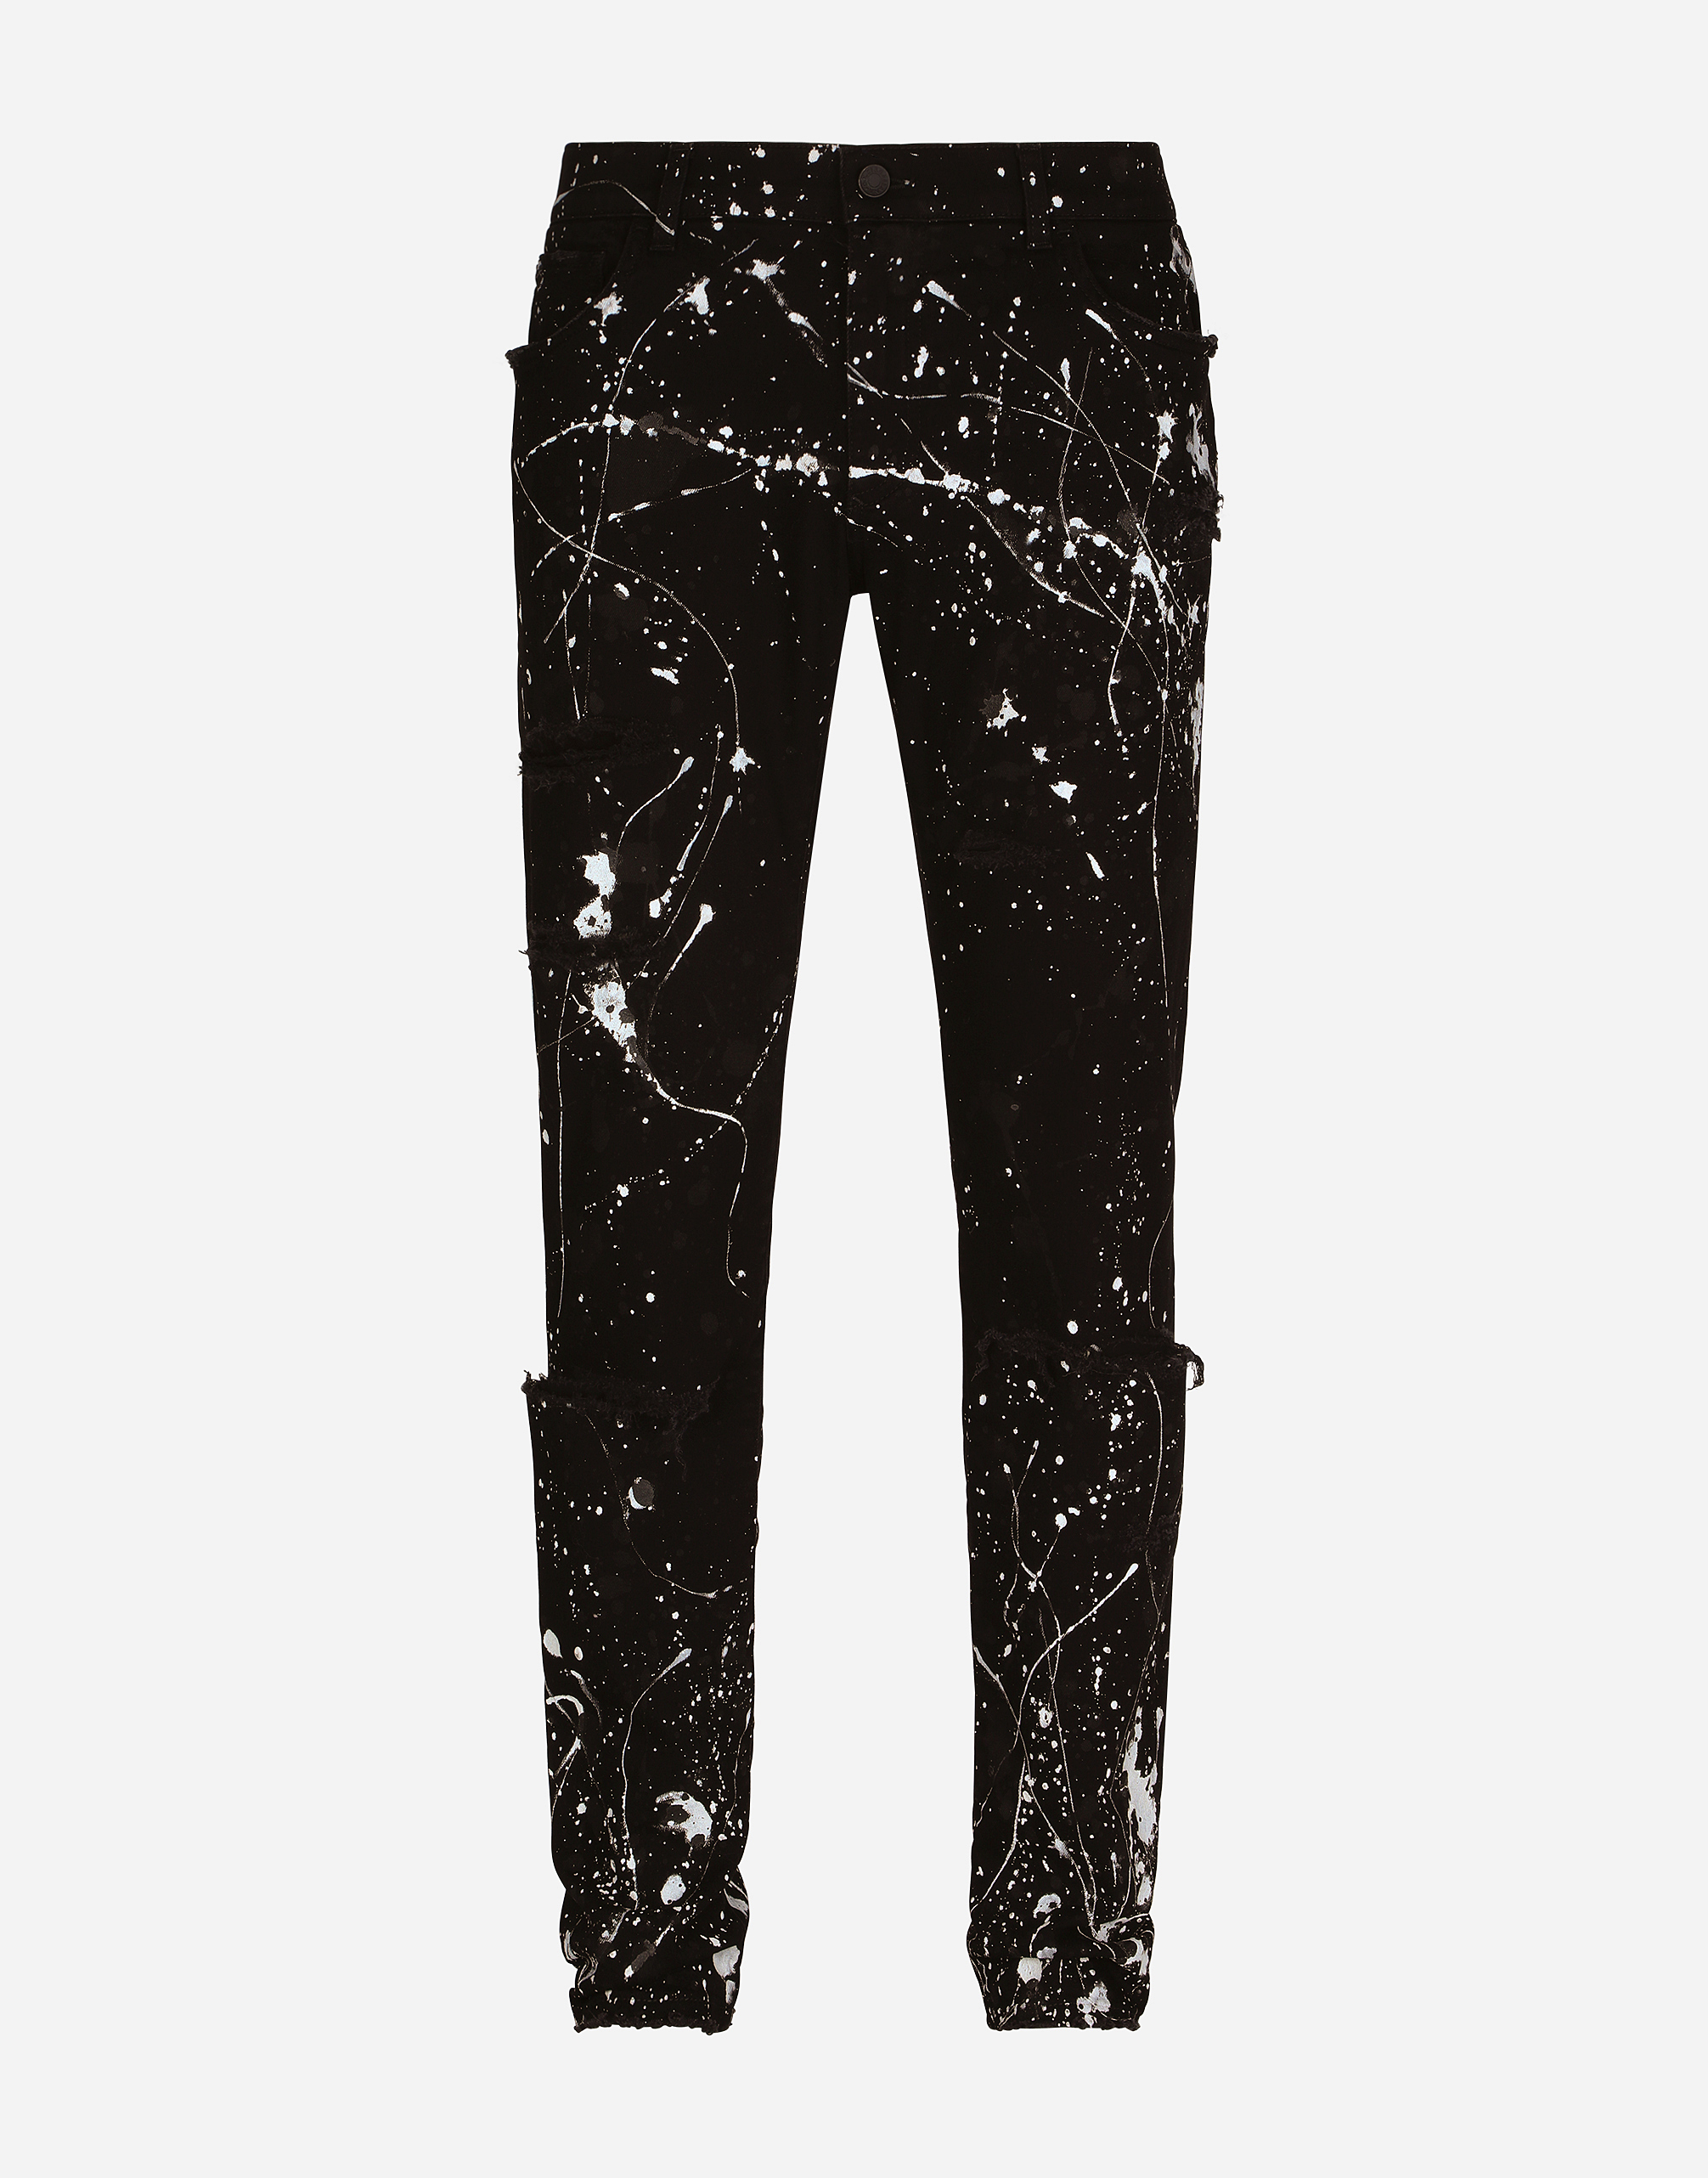 Skinny stretch jeans with rips and splash design in Multicolor